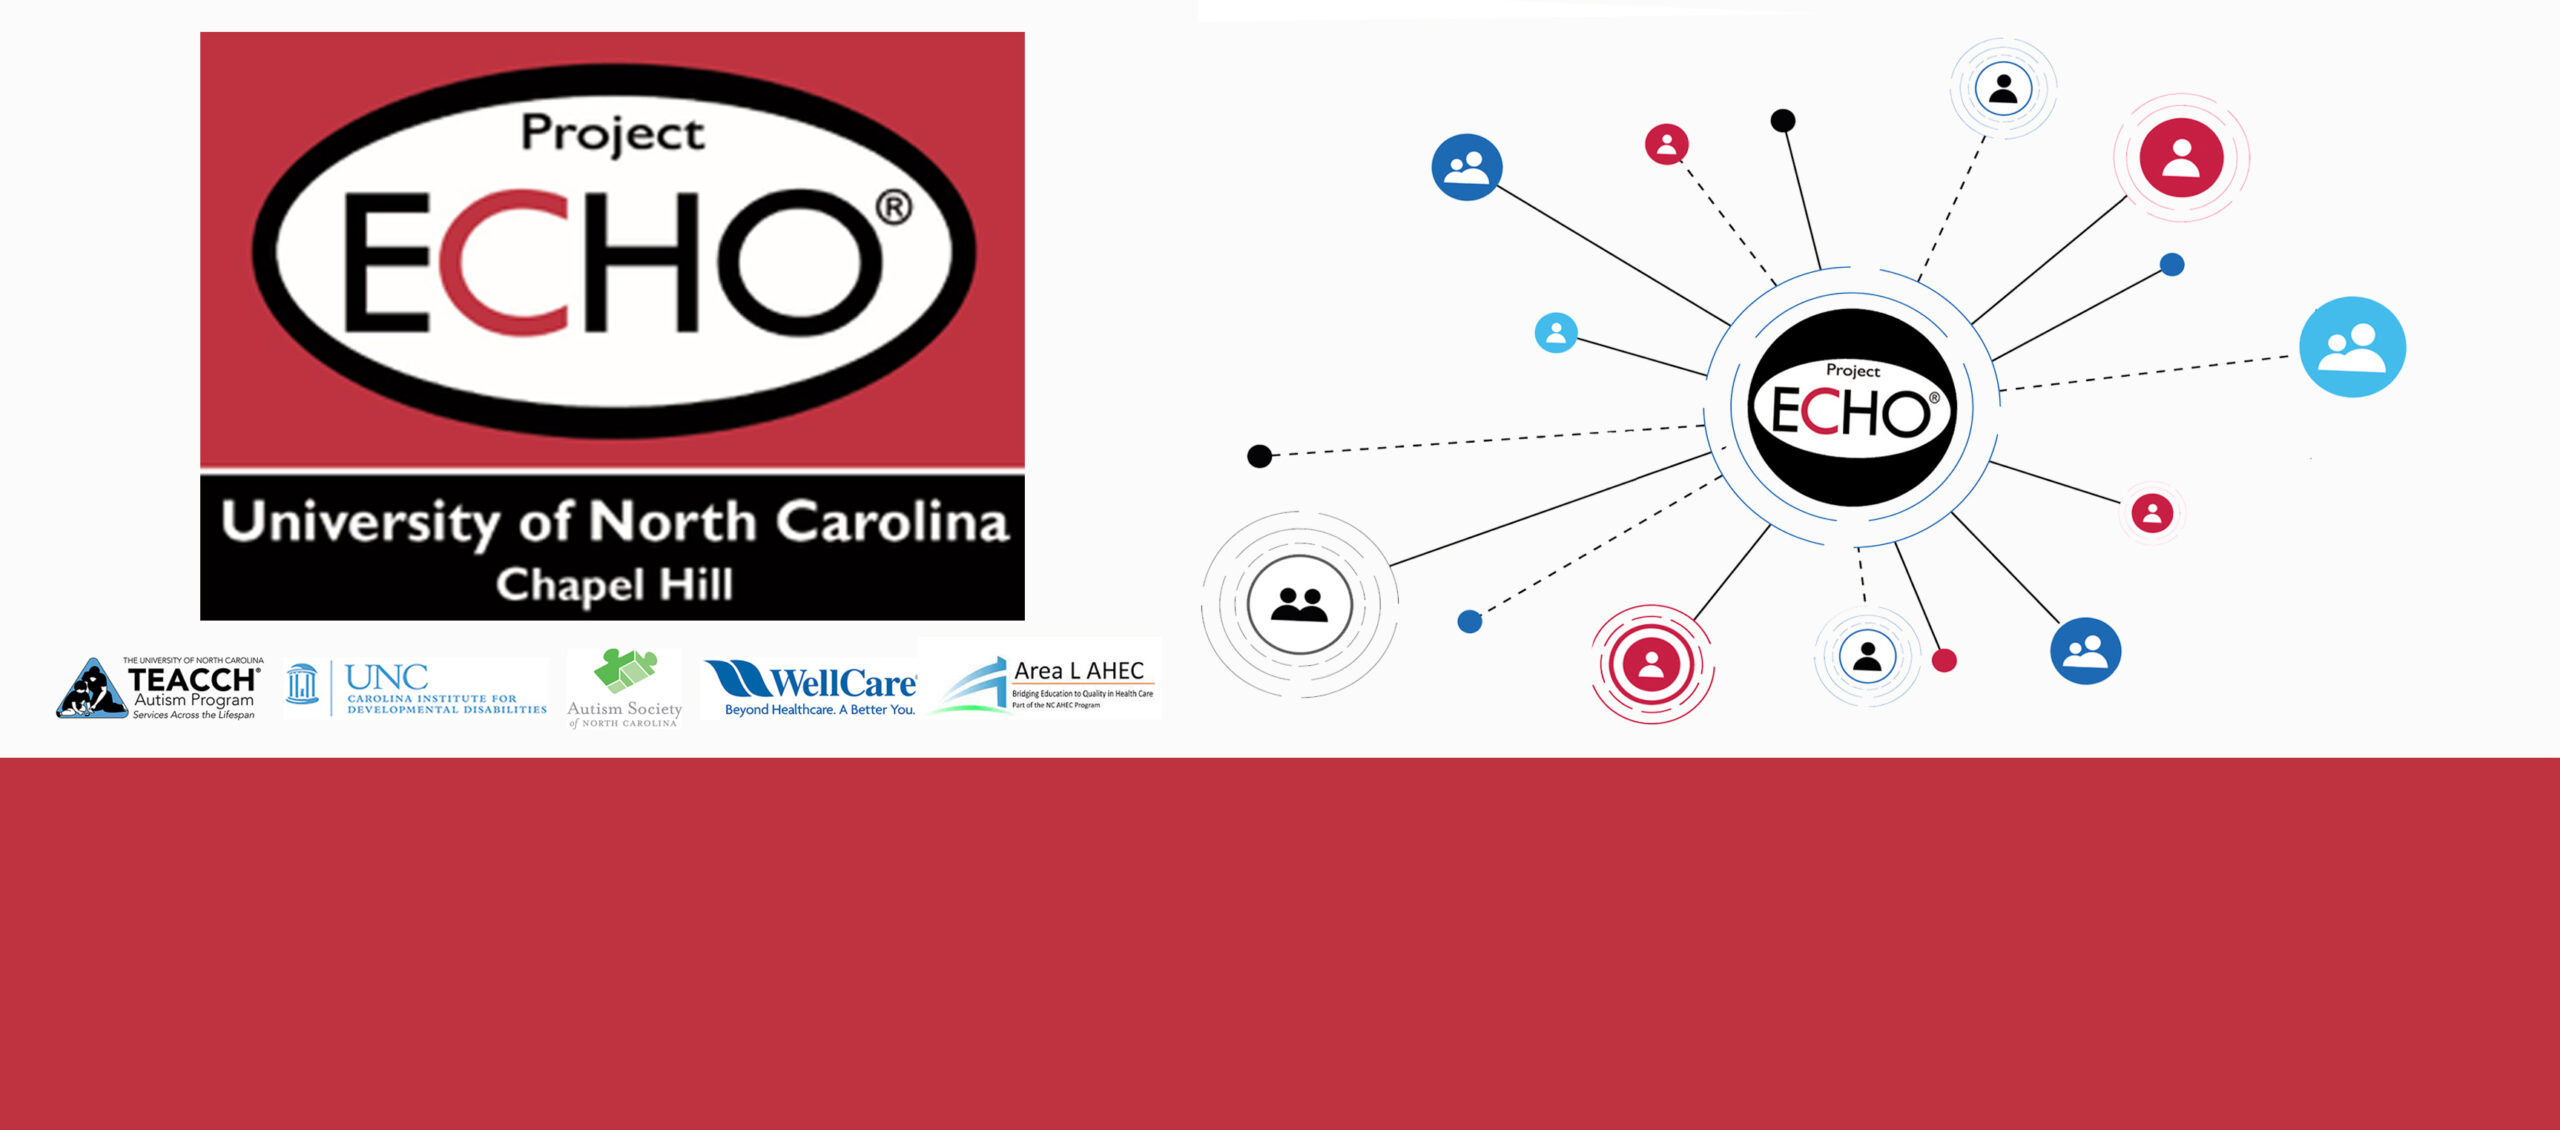 Project ECHO Autism Program web banner with logos